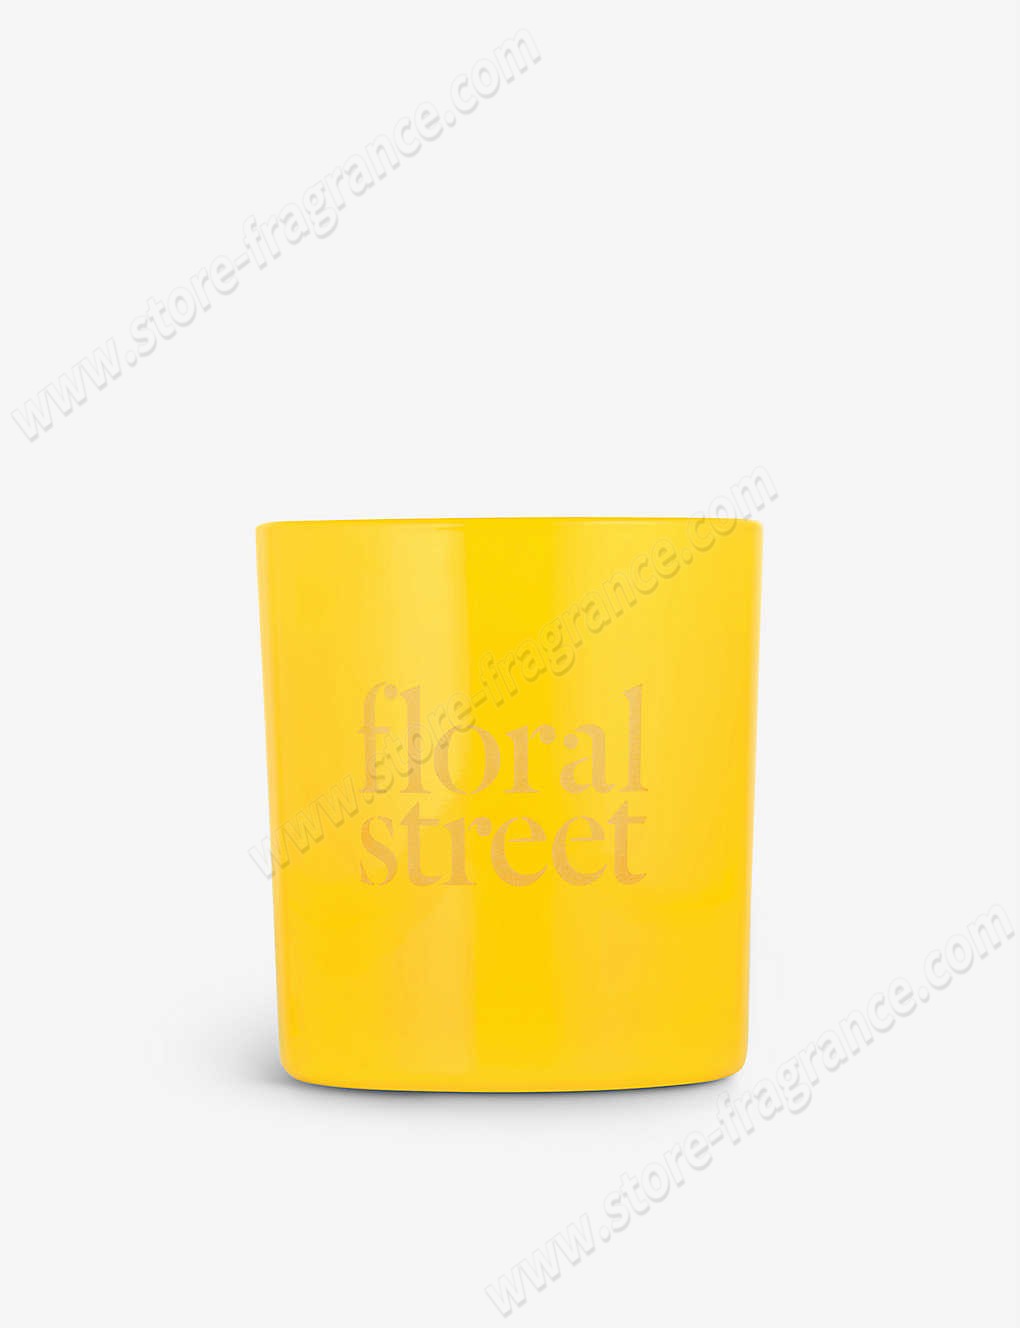 FLORAL STREET/Sunshine Bloom candle 200g ✿ Discount Store - FLORAL STREET/Sunshine Bloom candle 200g ✿ Discount Store